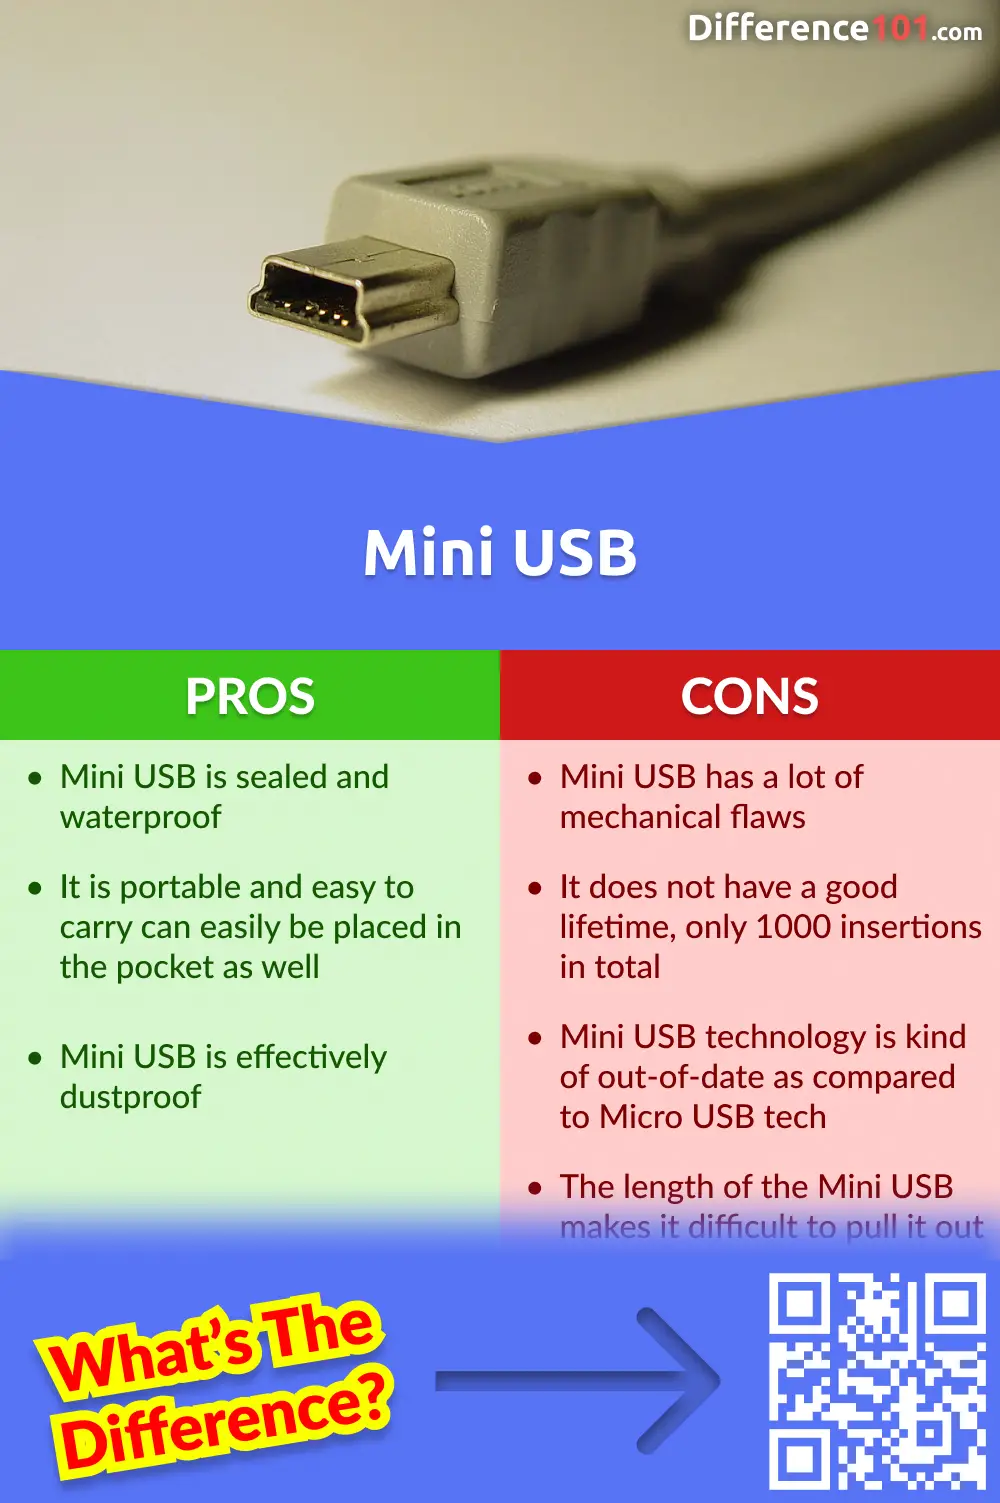 Pros and Cons of Mini USB